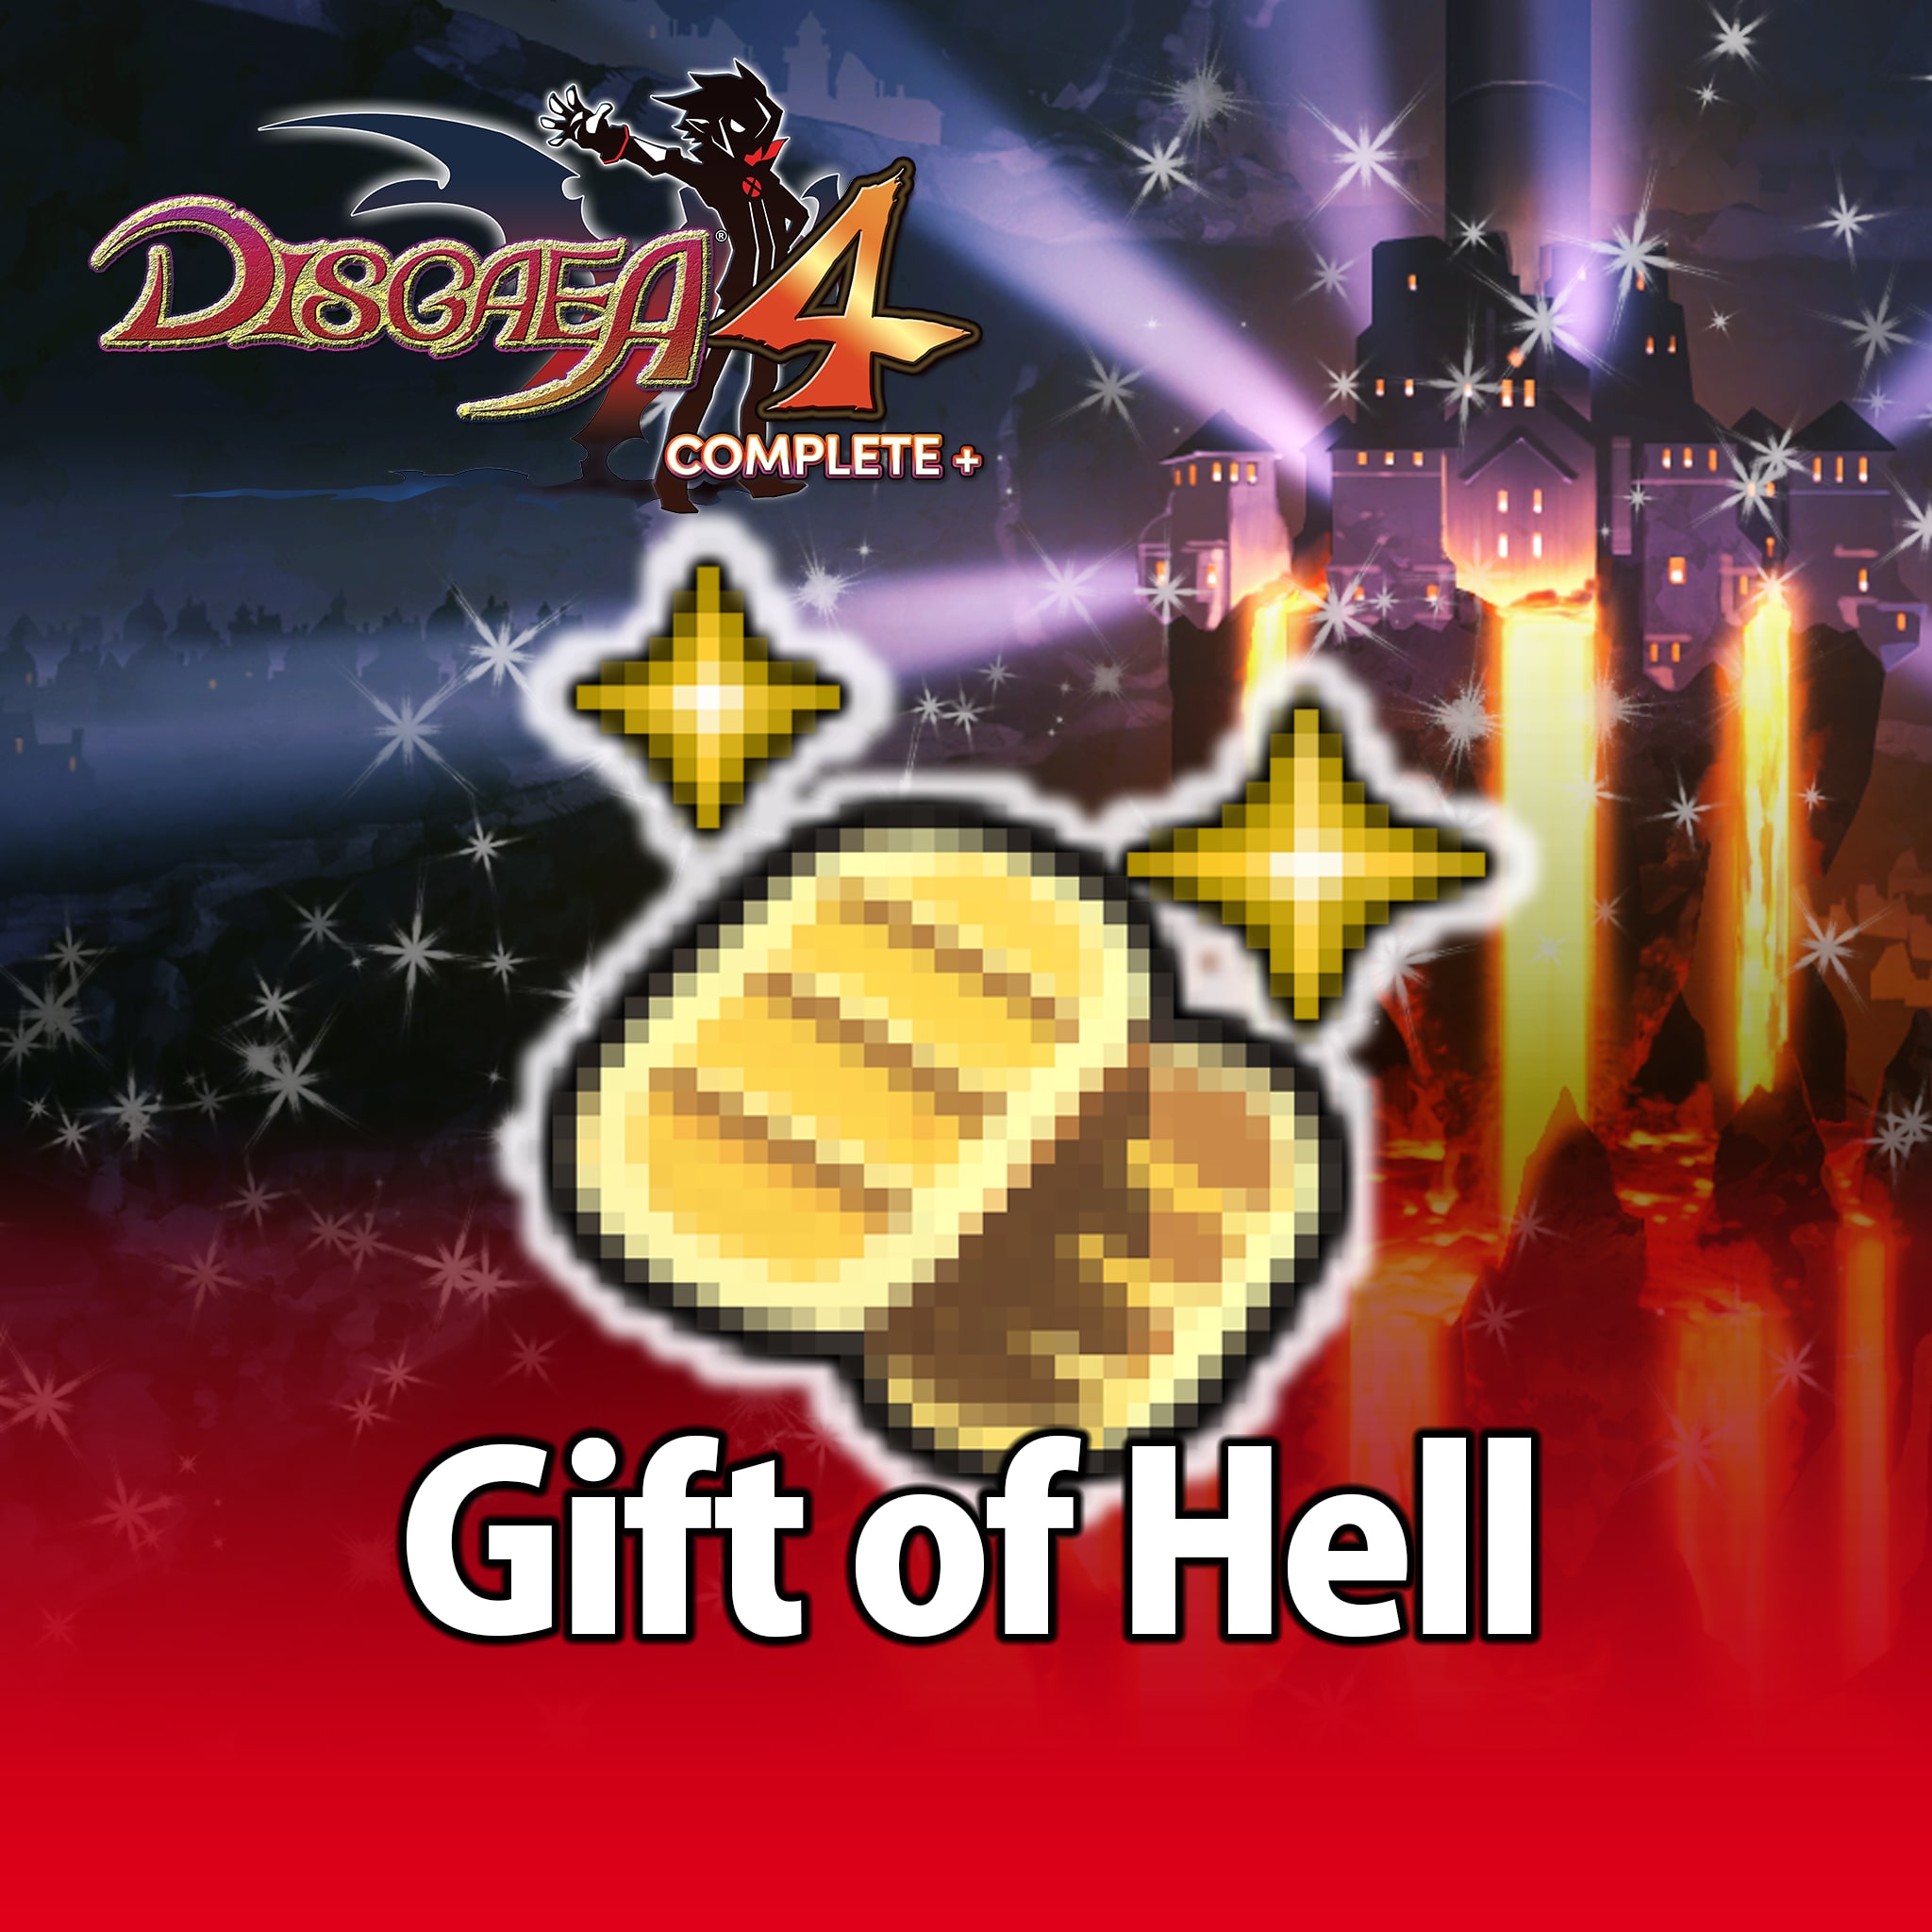 Disgaea 4 Complete+ Gift of Hell